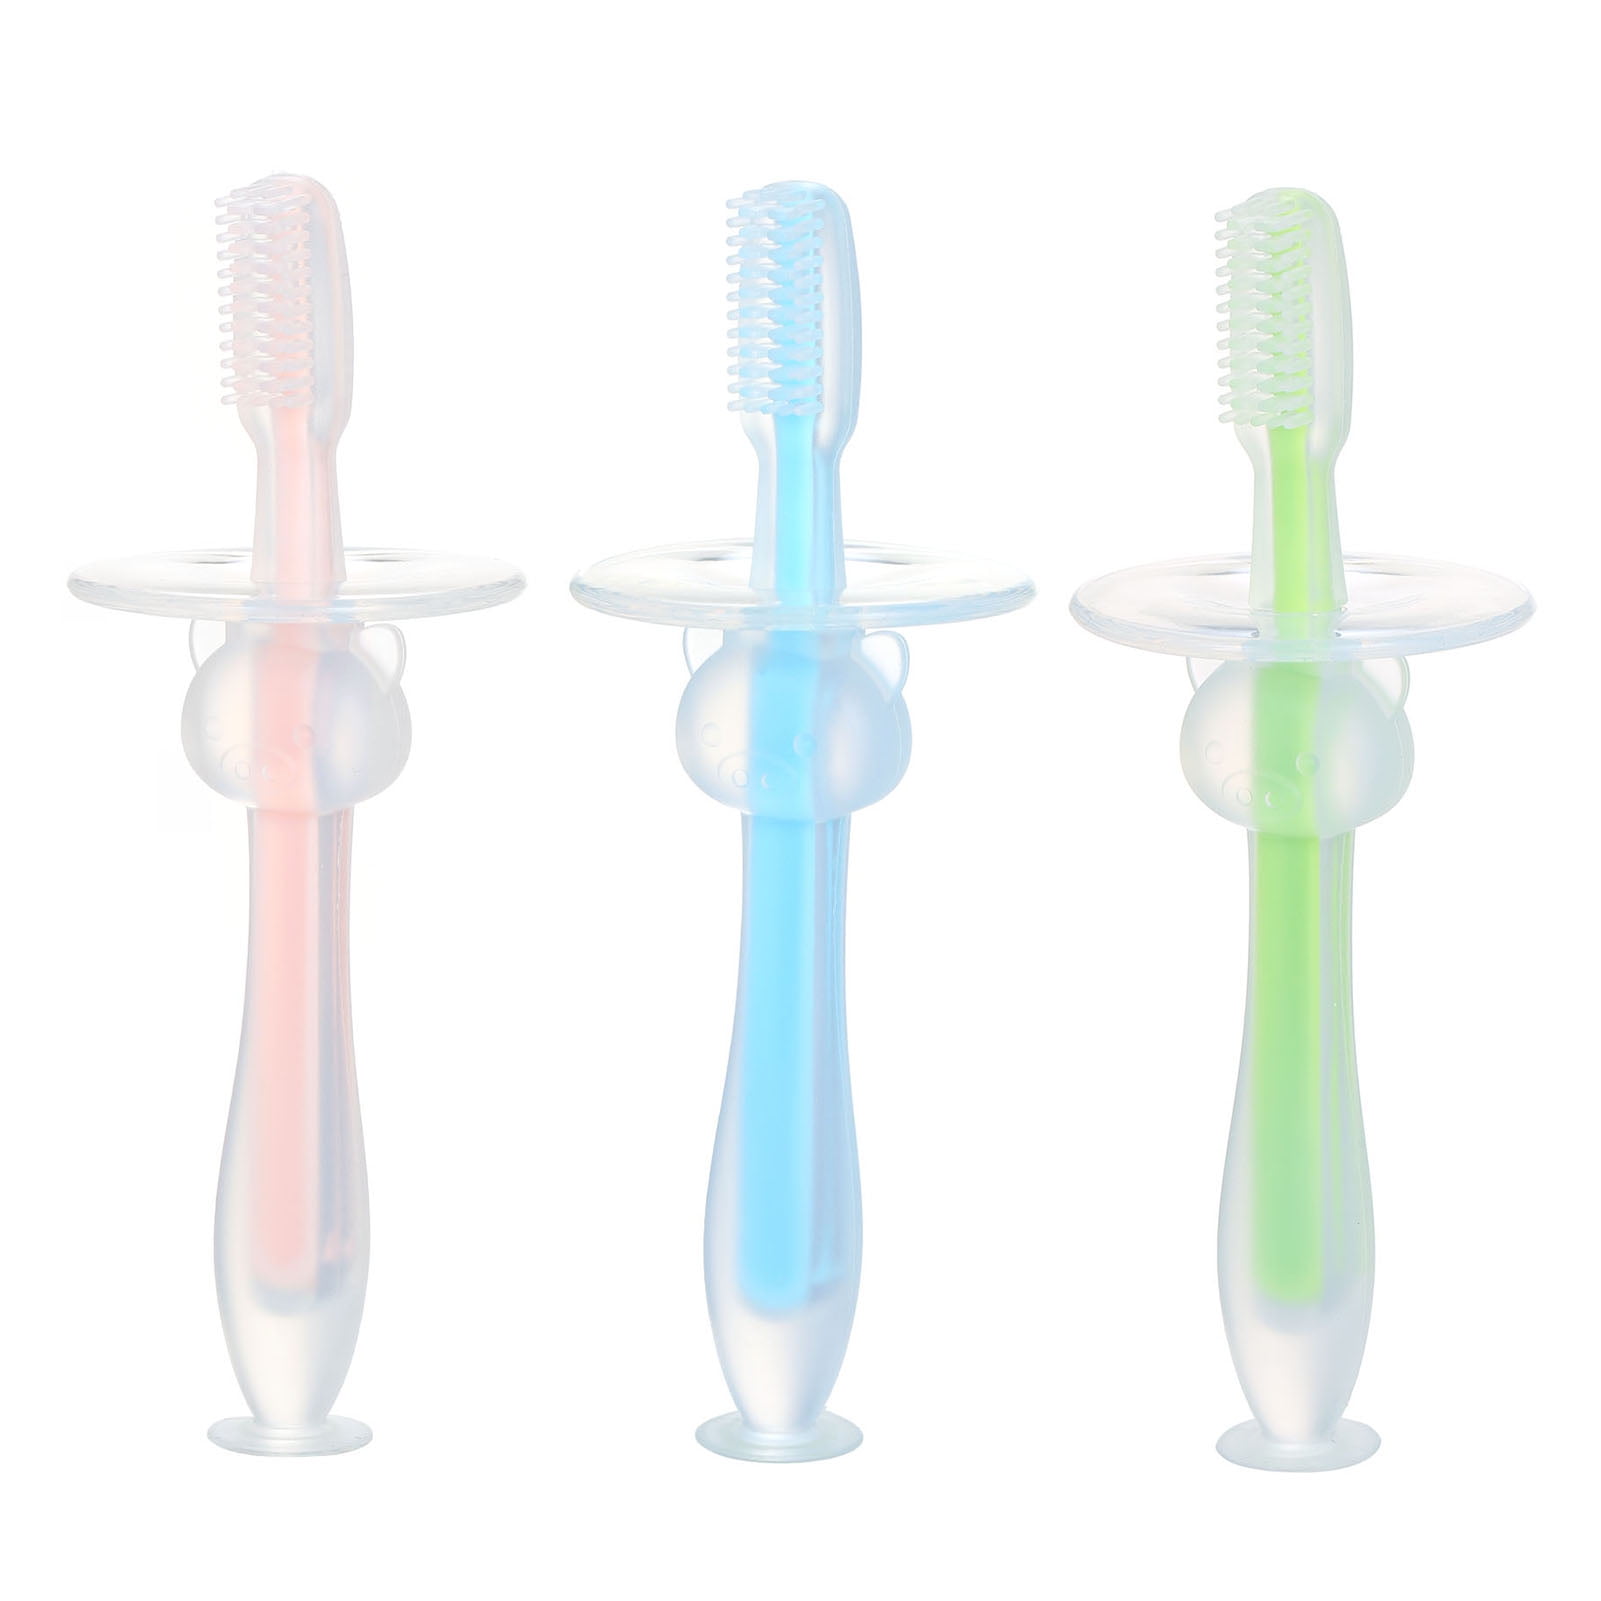 Silicone Mushroom Toothbrush Baby Teether Training Toothbrushes Tooth Clean 